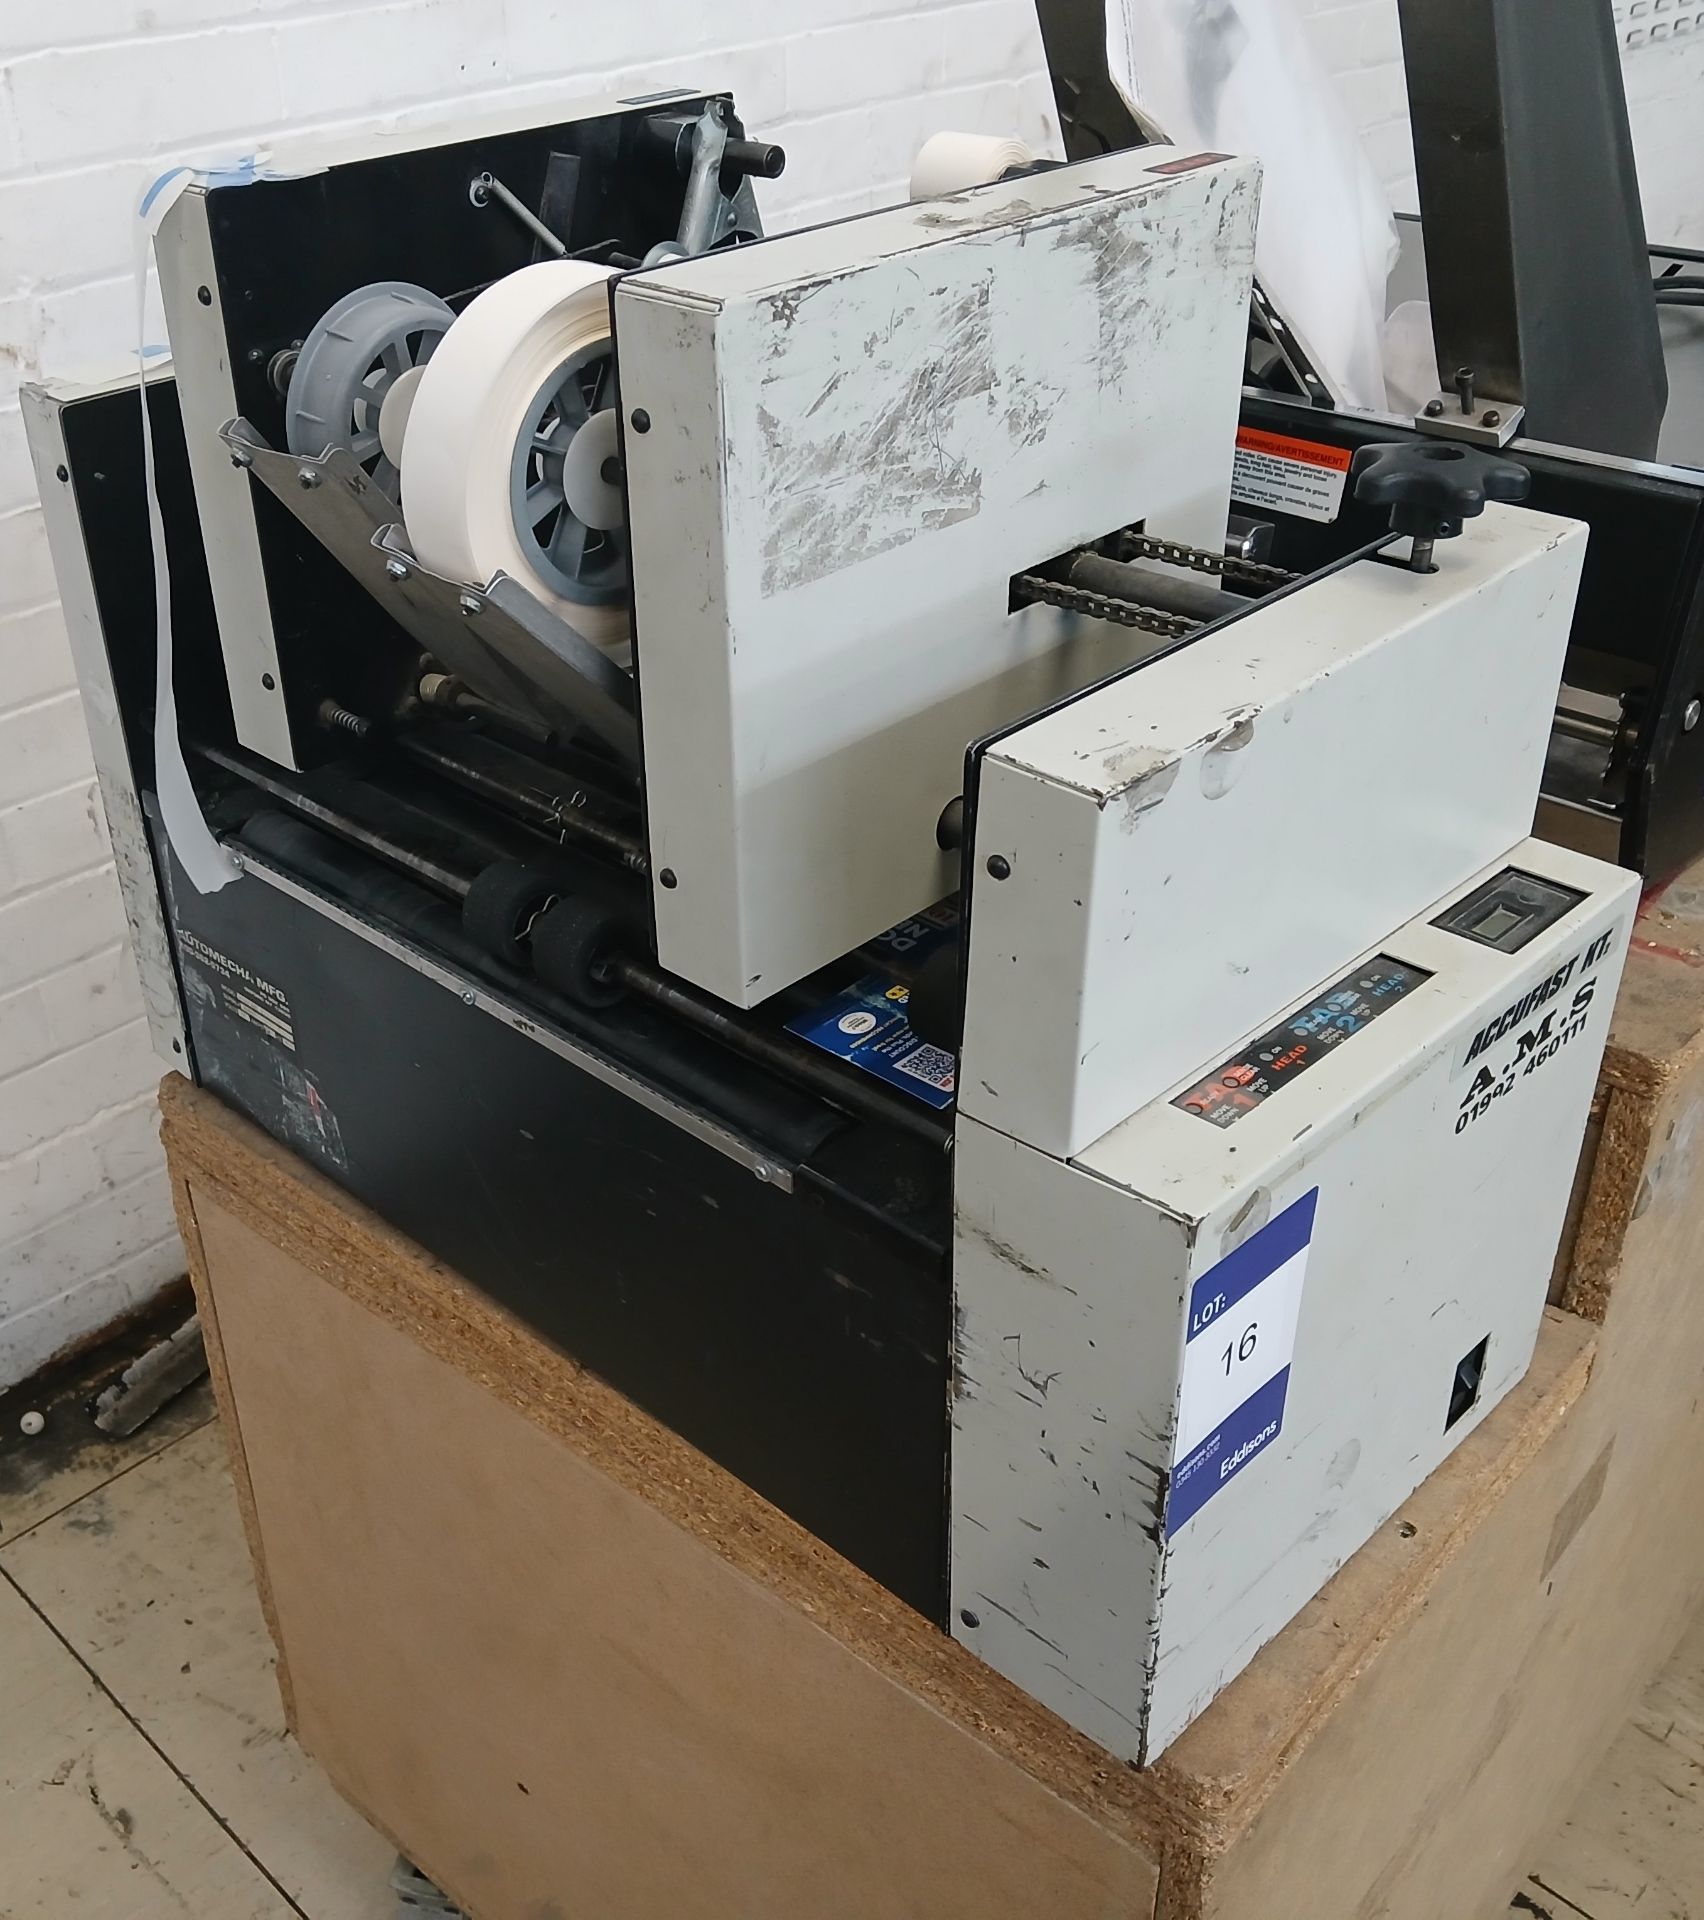 Automecha Accufast KT2 twin head single tabber mailing machine, Serial Number 411921, 240V